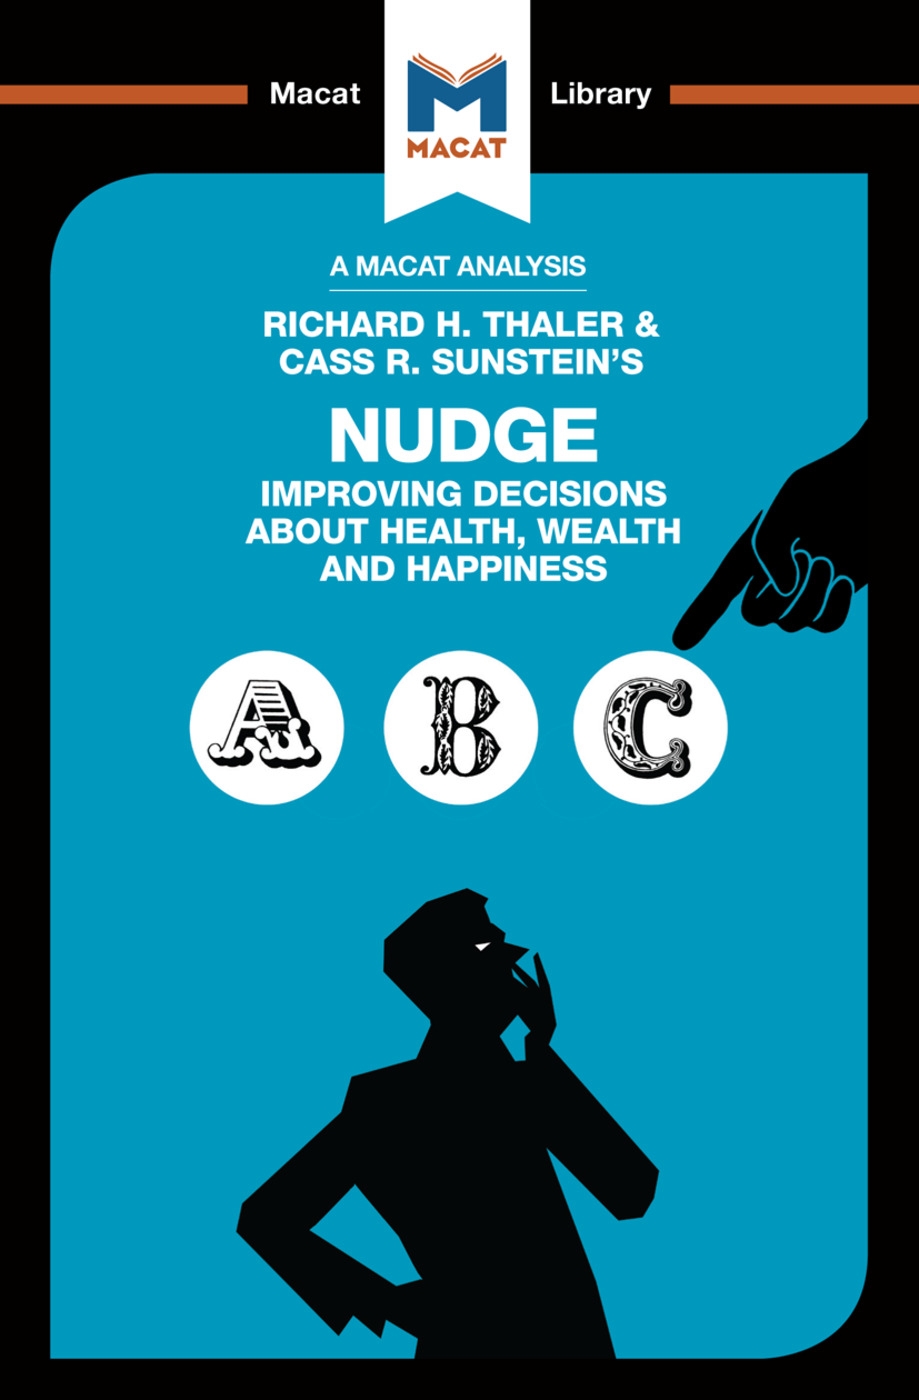 An Analysis of Richard H. Thaler and Cass R. Sunstein’s Nudge: Improving Decisions About Health, Wealth and Happiness